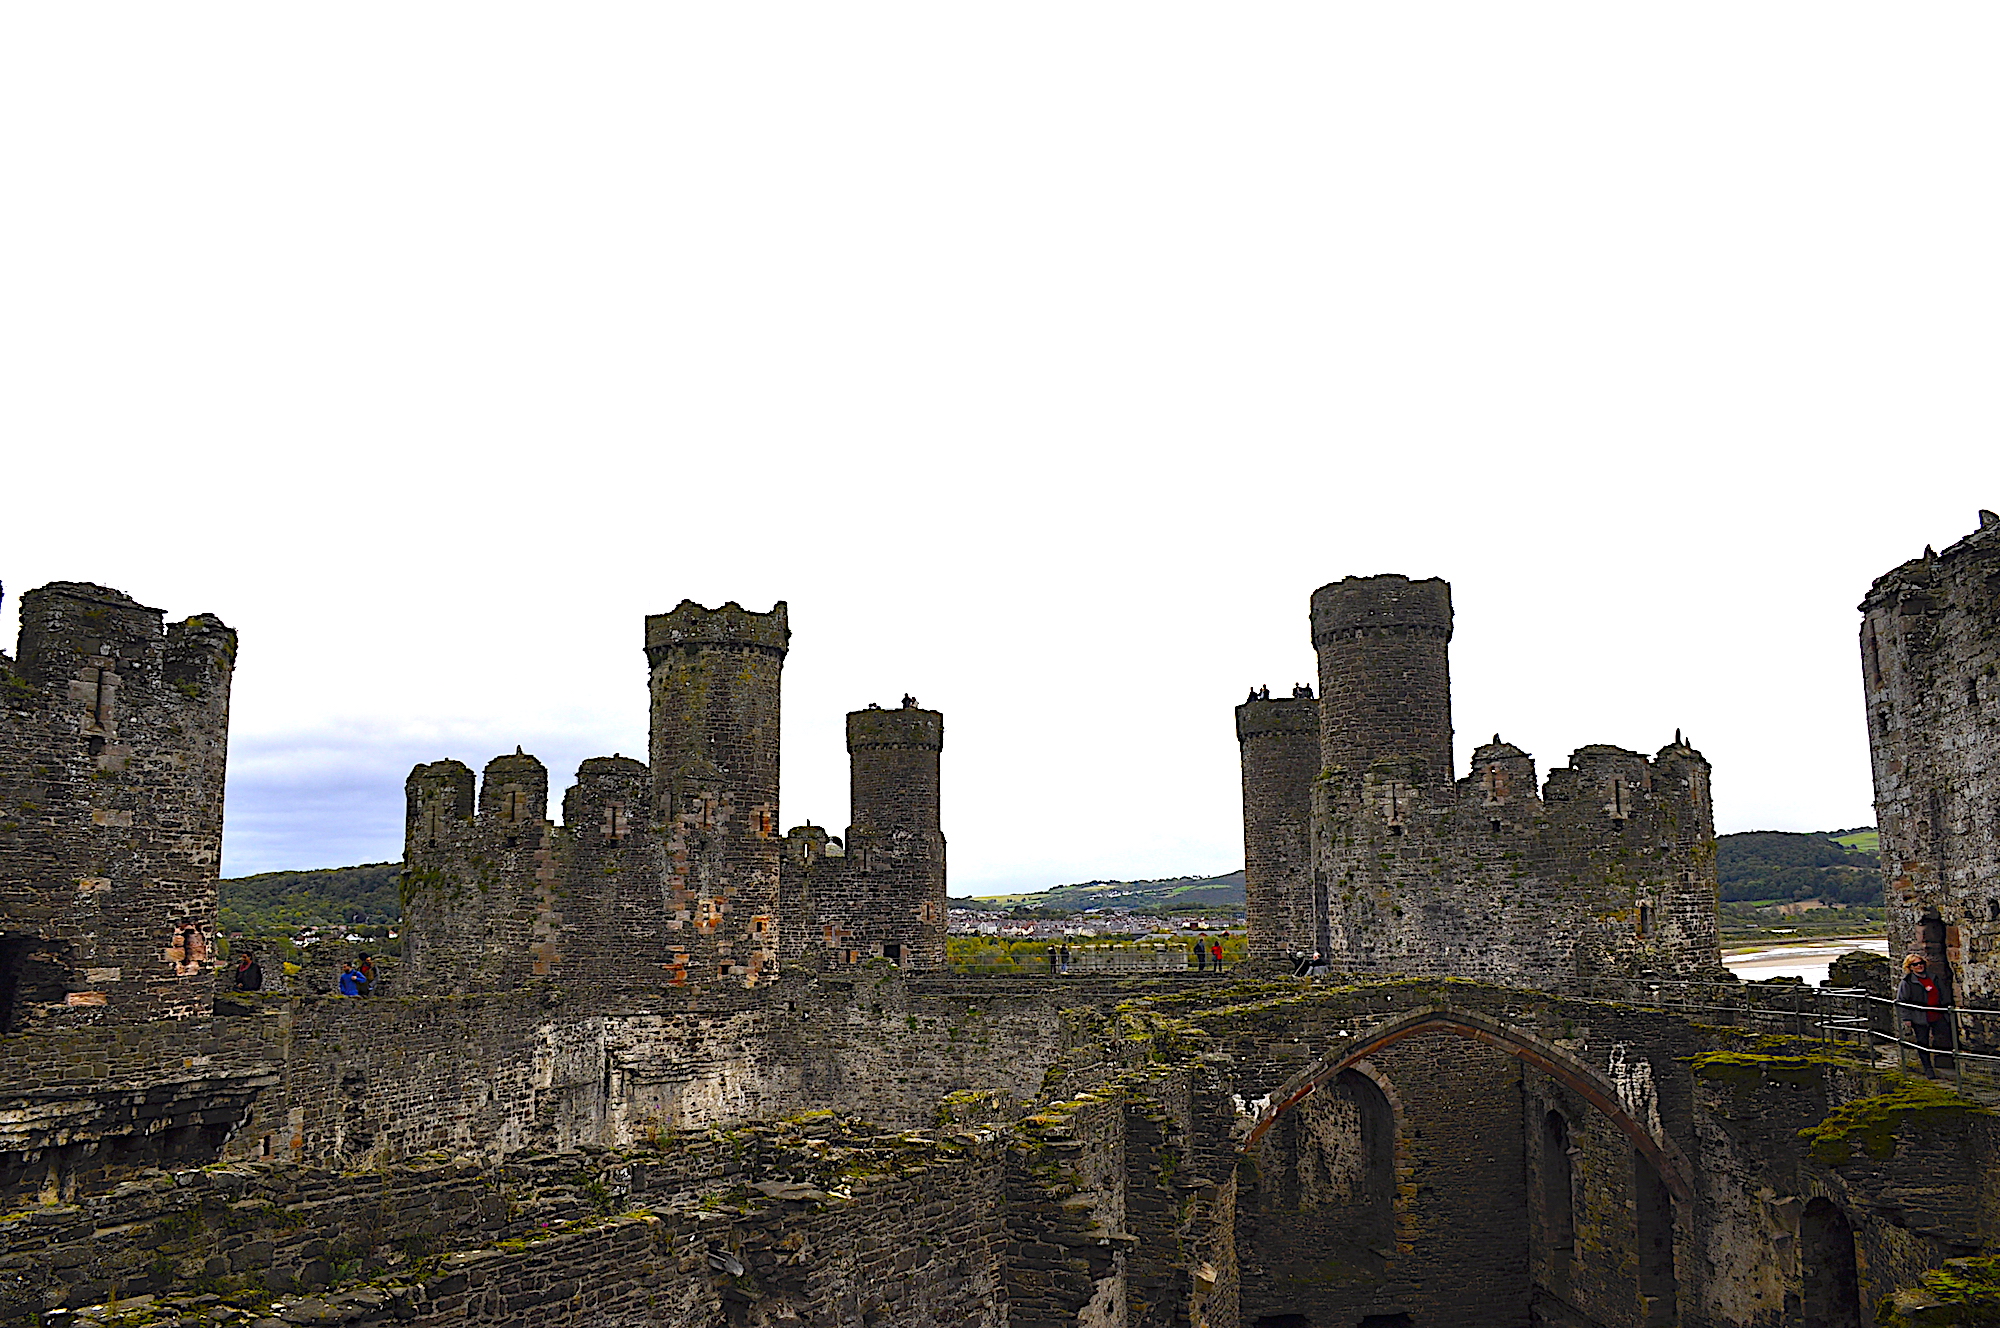 The remains of Conwy Castle